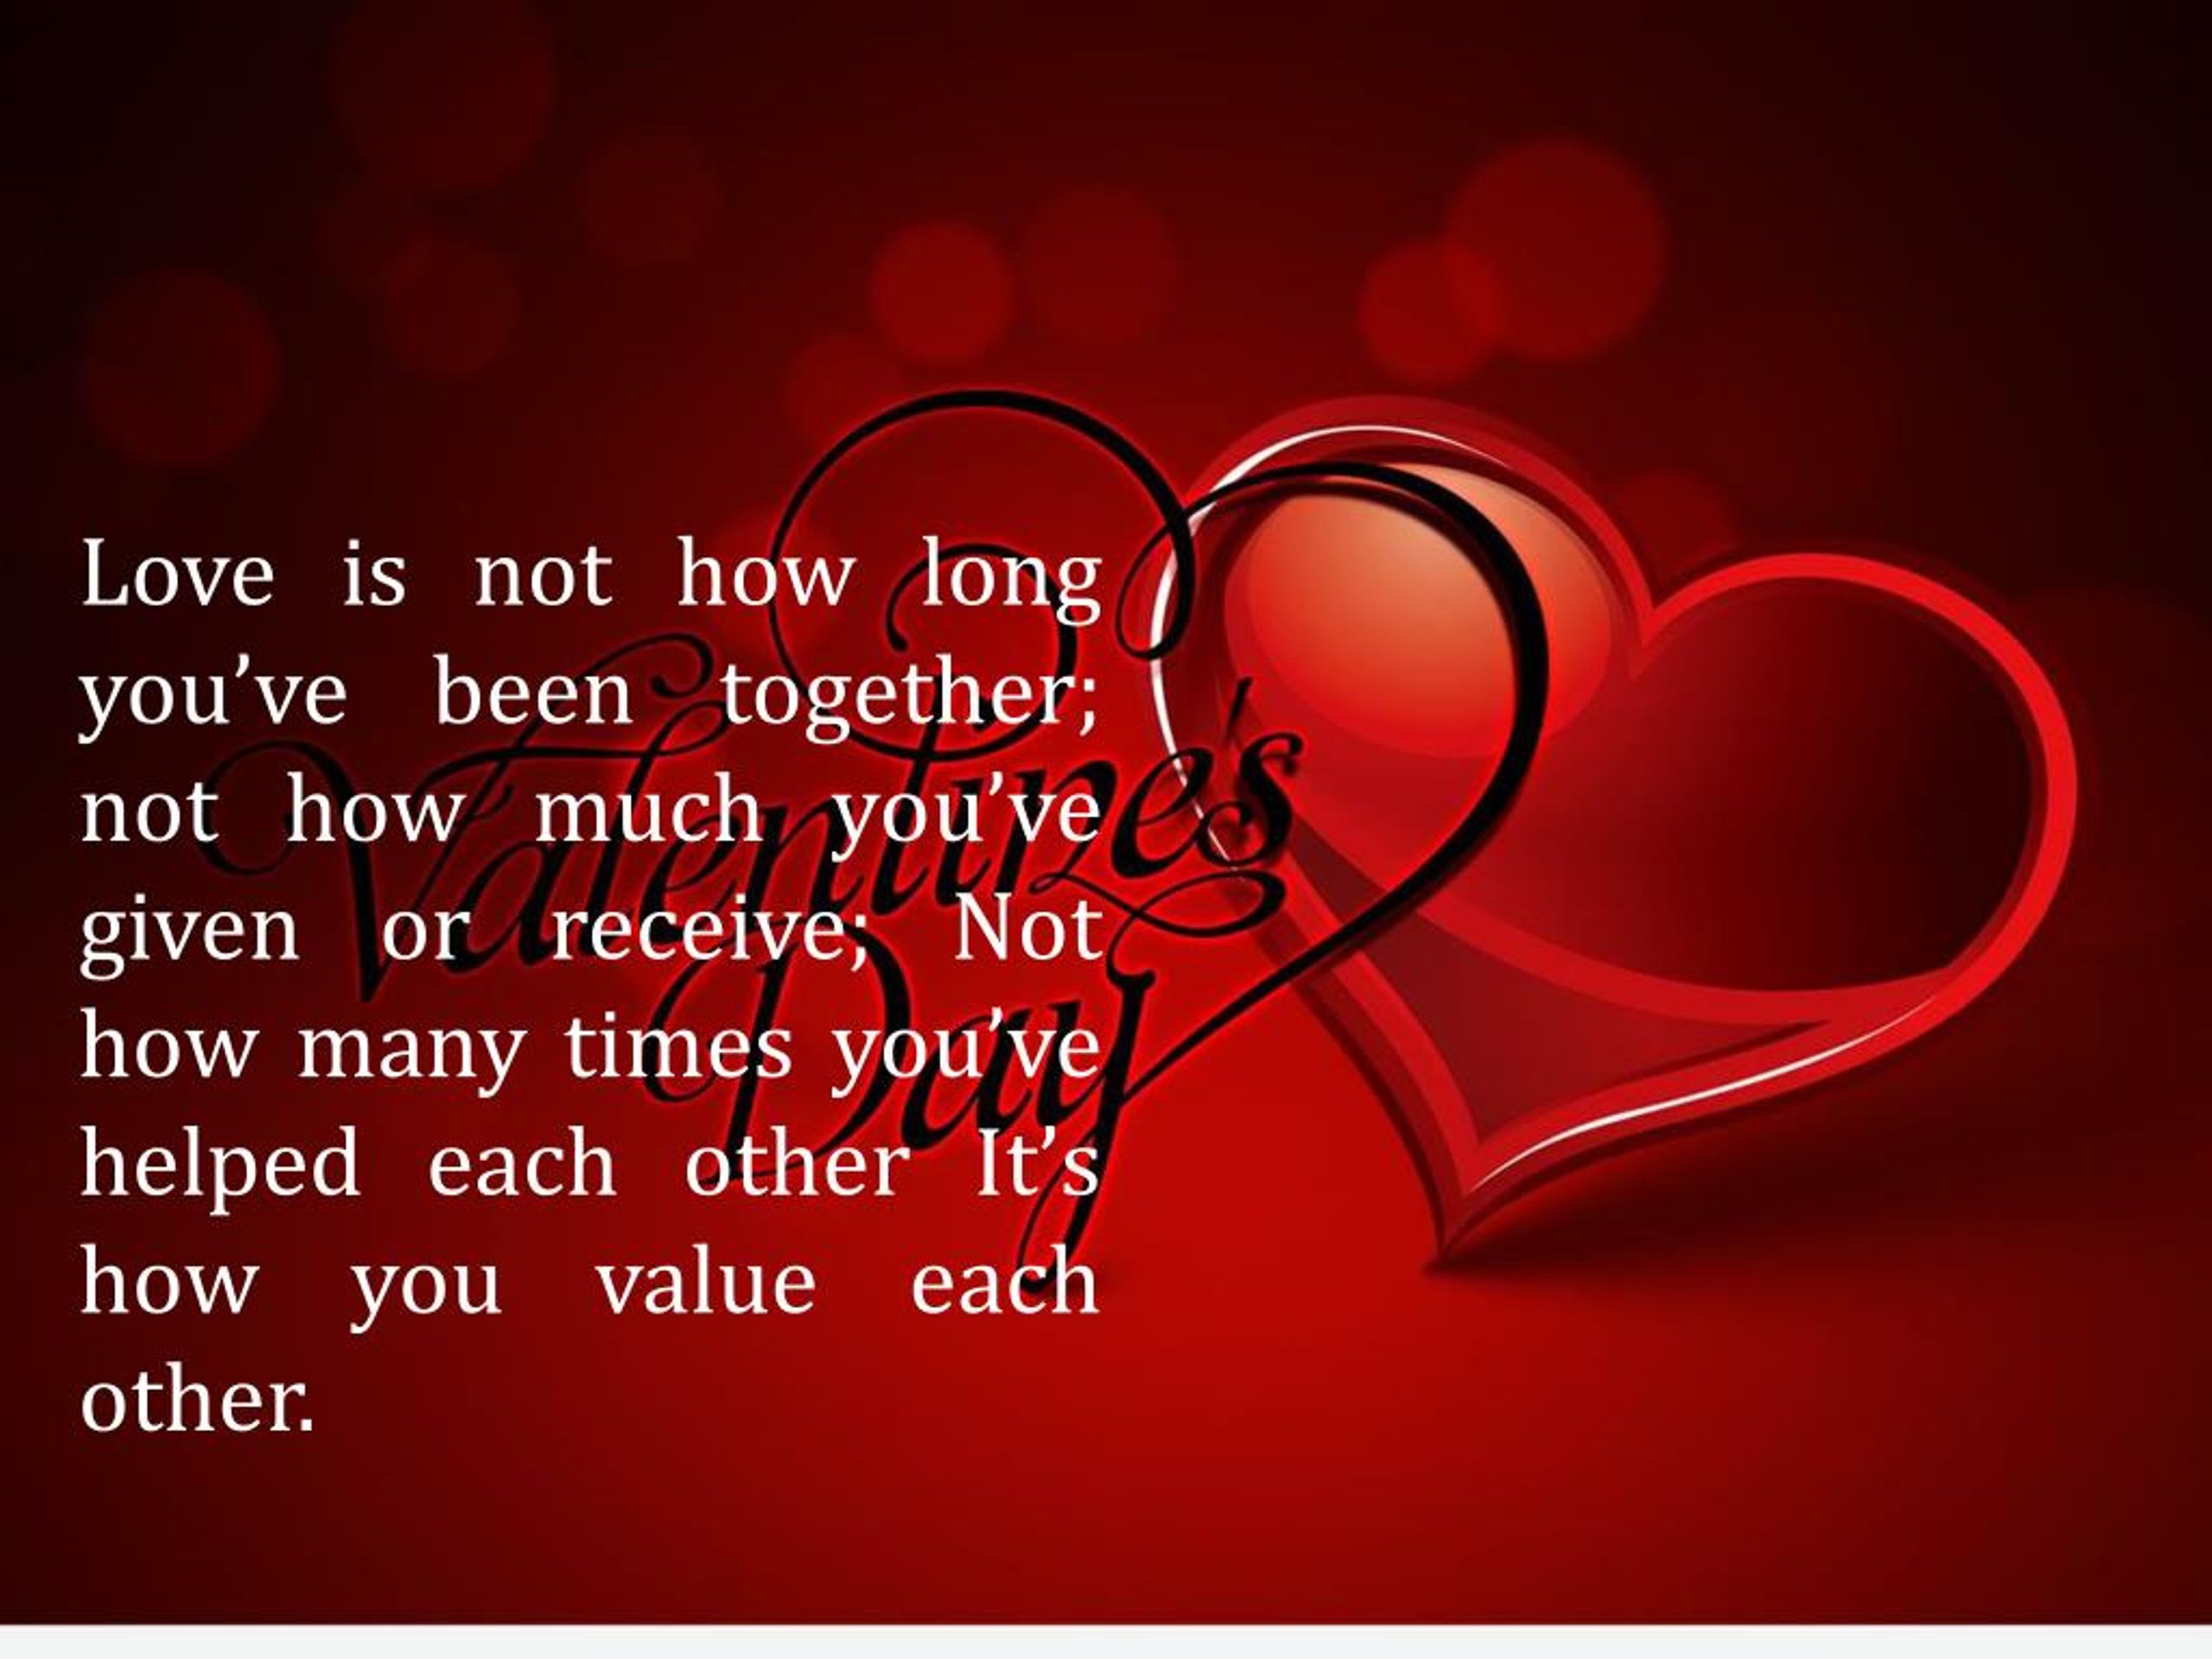 PPT - Grab Some Valentines Day SMS Messages for Lovers PowerPoint ...